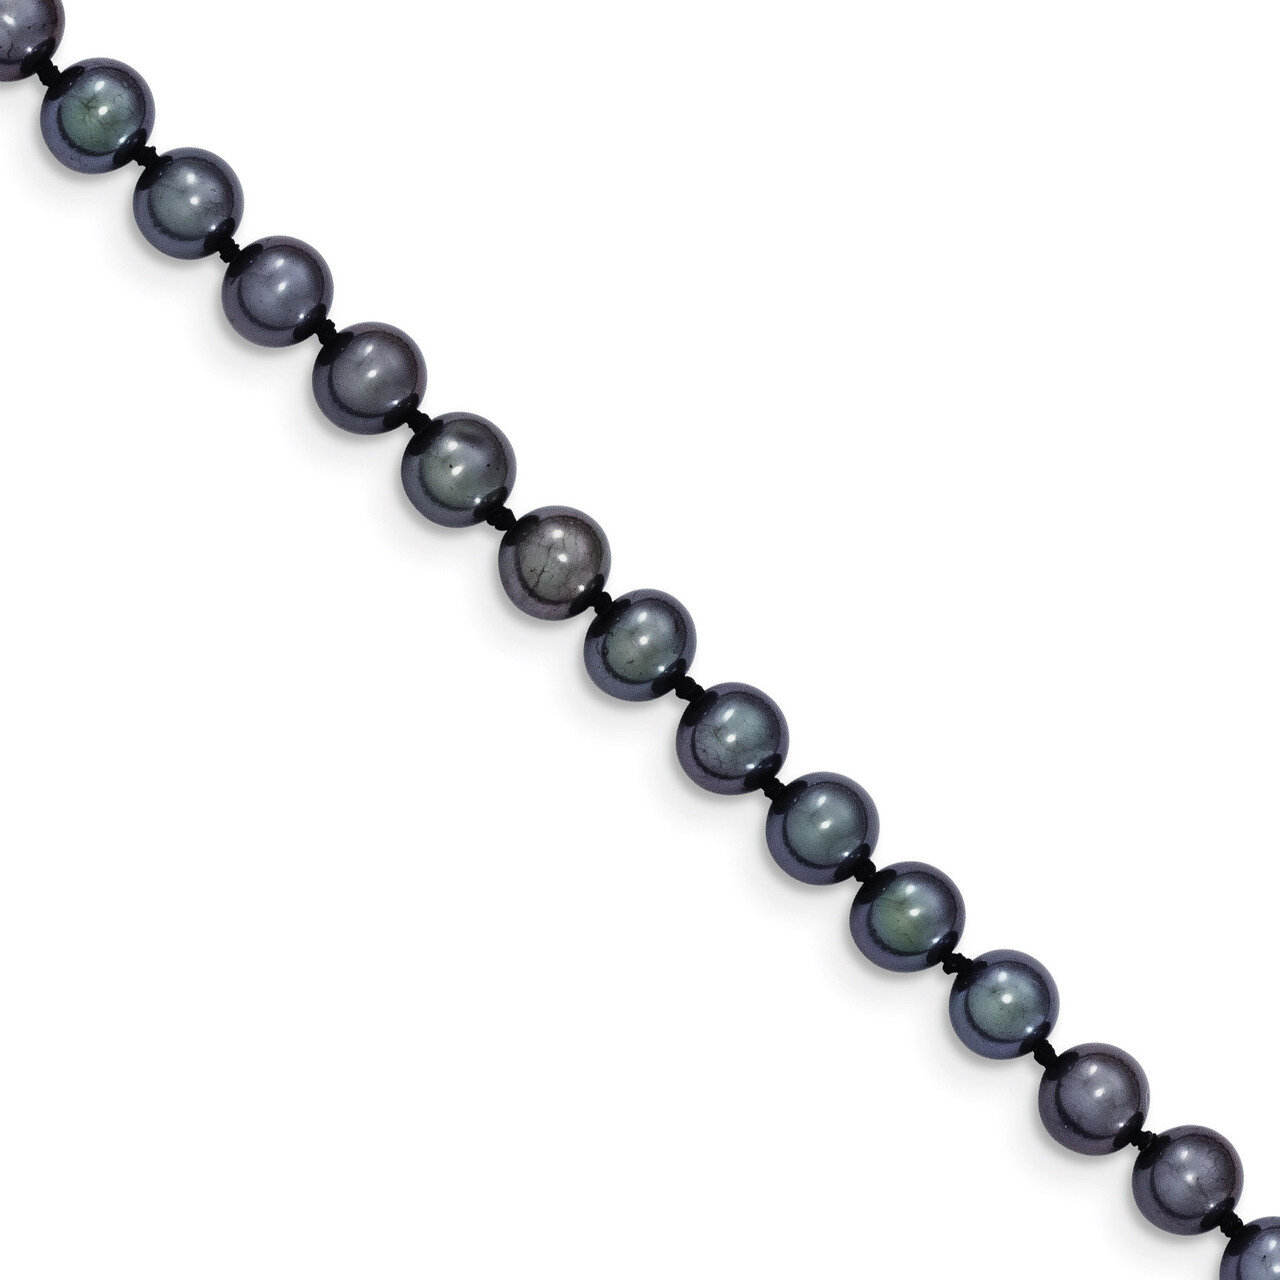 5-6mm Black Cultured Near Round Pearl Necklace 16 Inch 14k Gold BPN050-16